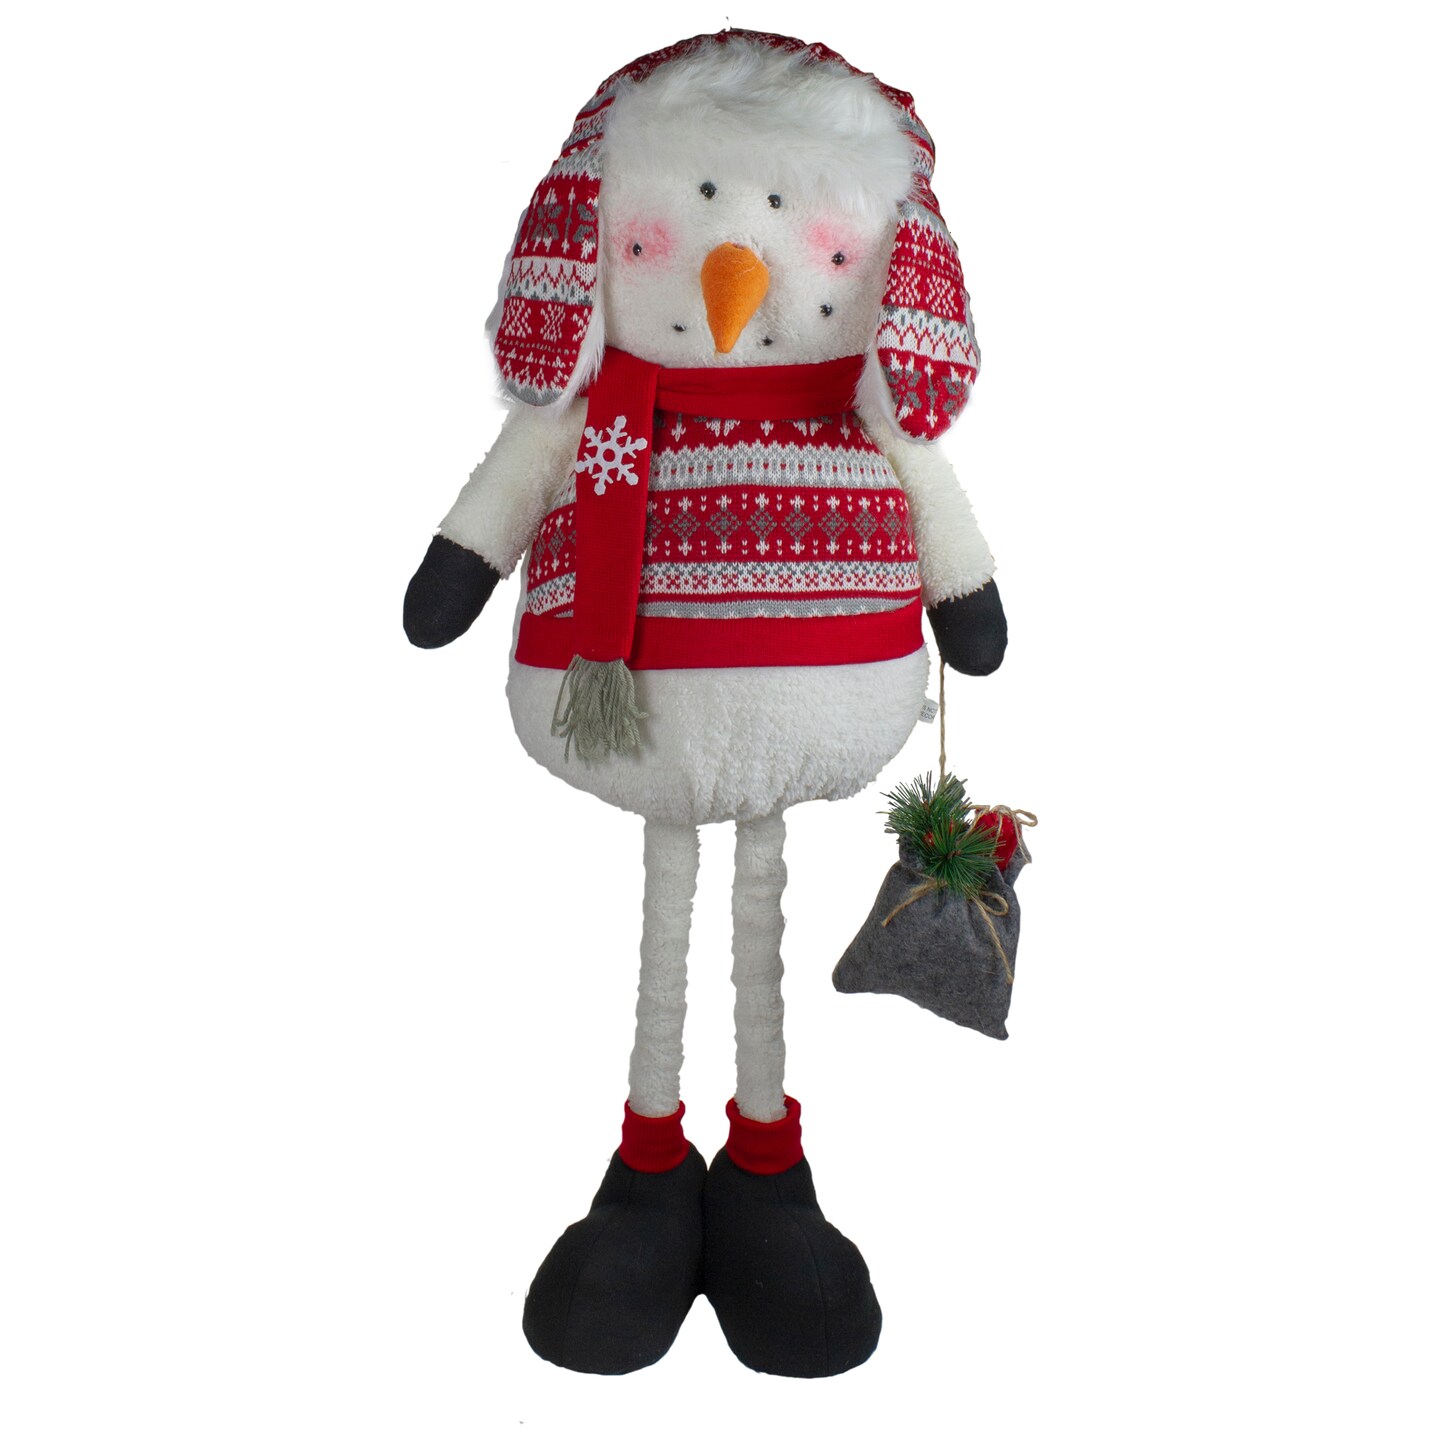 Northlight 33-Inch Red, White, and Gray Plush Christmas Snowman with Telescopic Legs